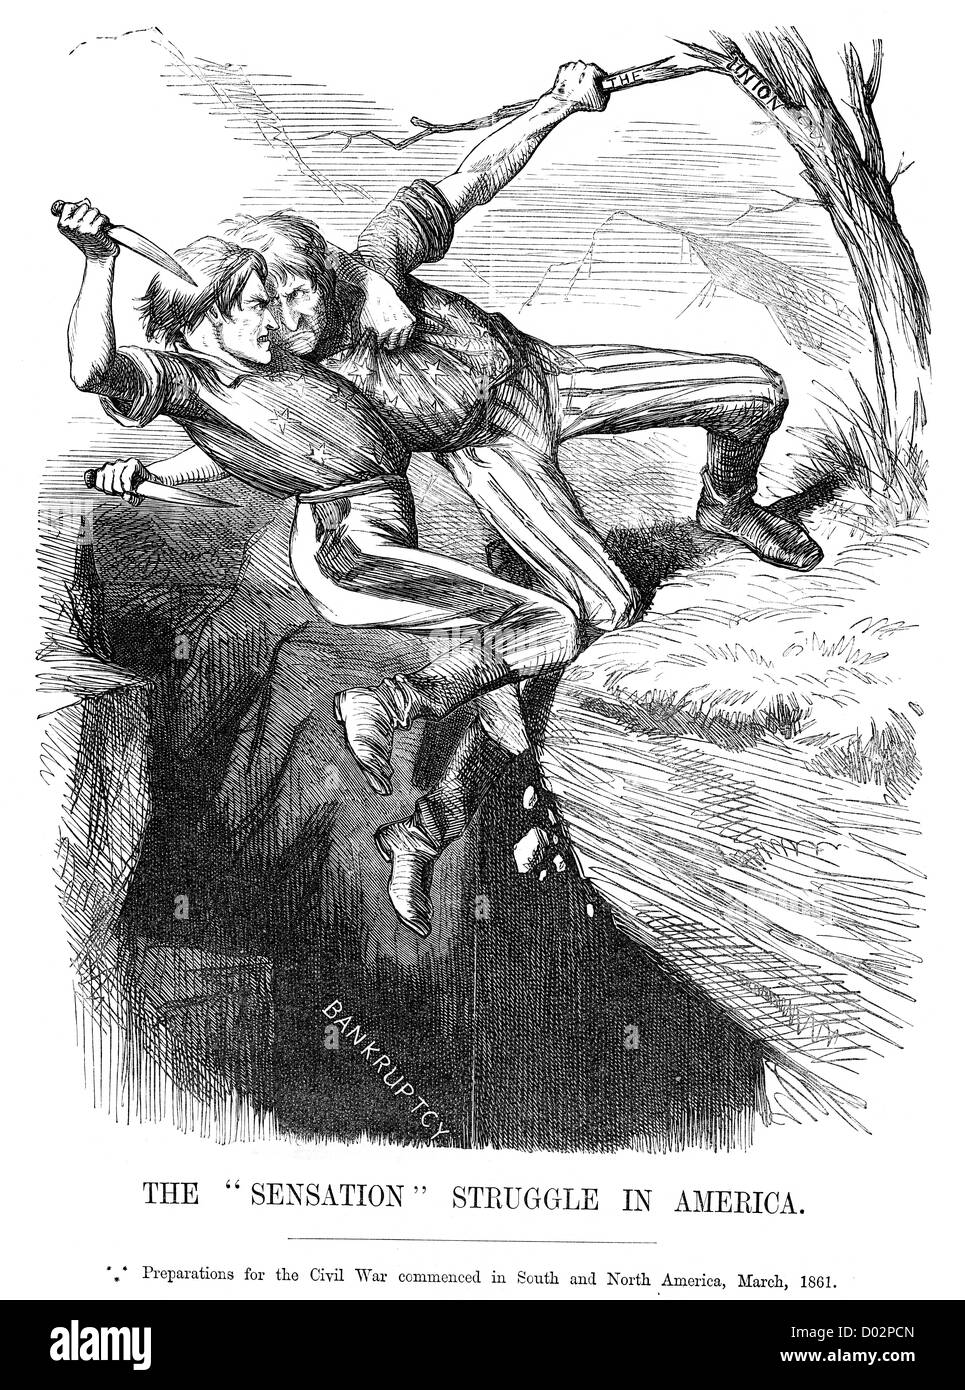 Vintage engraving from 1864 of a political satirical cartoon depicting the outbreak of the American Civil War. Stock Photo